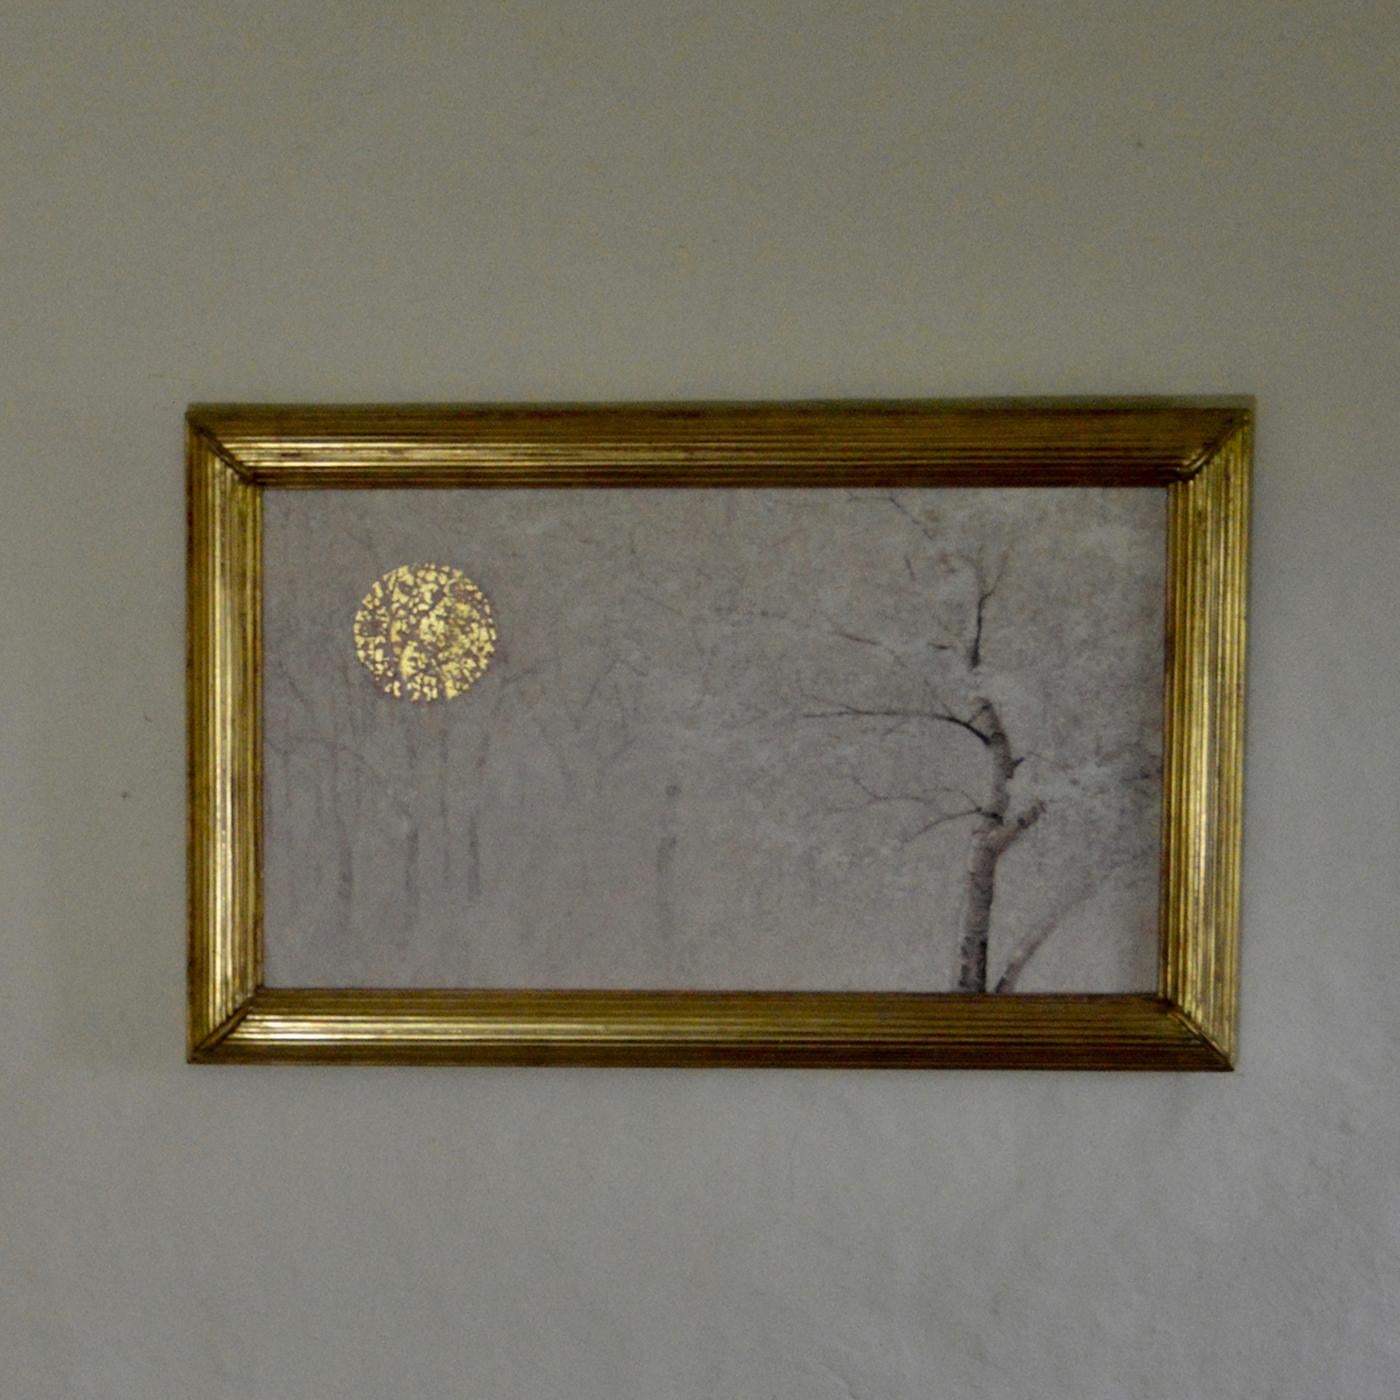 This delightful oil painting on a wooden panel depicts a quiet landscape covered in a mantle of pristine snow. The reflective power of the gold leaf is showcased un the moon/sun, whose light filters through the tree branches and mixes with the dewy